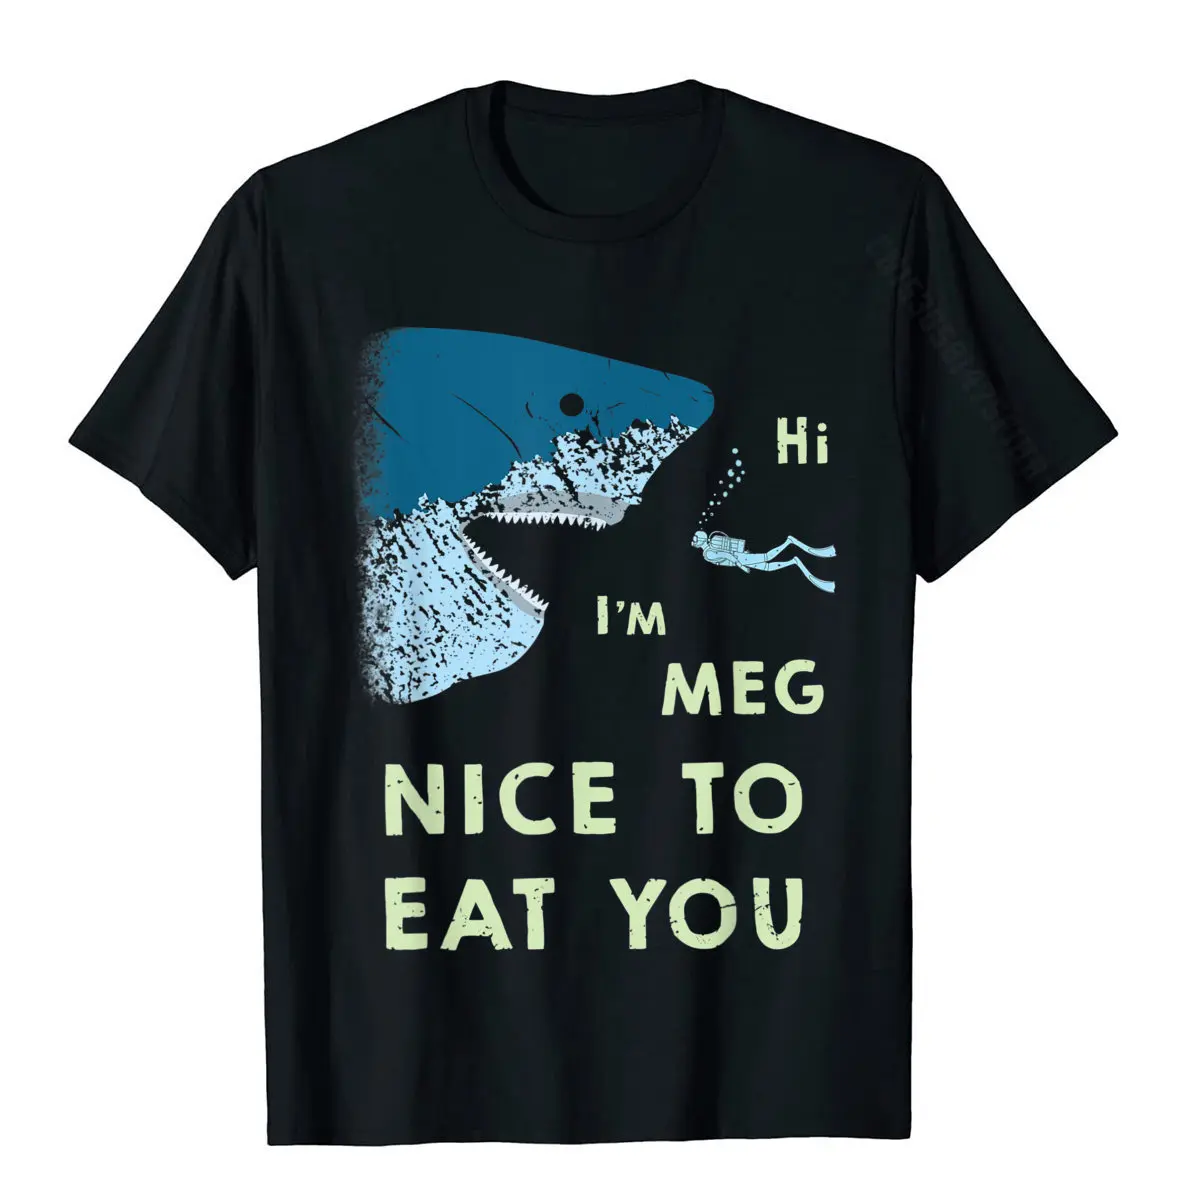 Megalodon T-Shirt | Funny Nice To Eat You Meg Shark T Shirt Special Casual Top T-Shirts Cotton Adult Tops T Shirt Casual